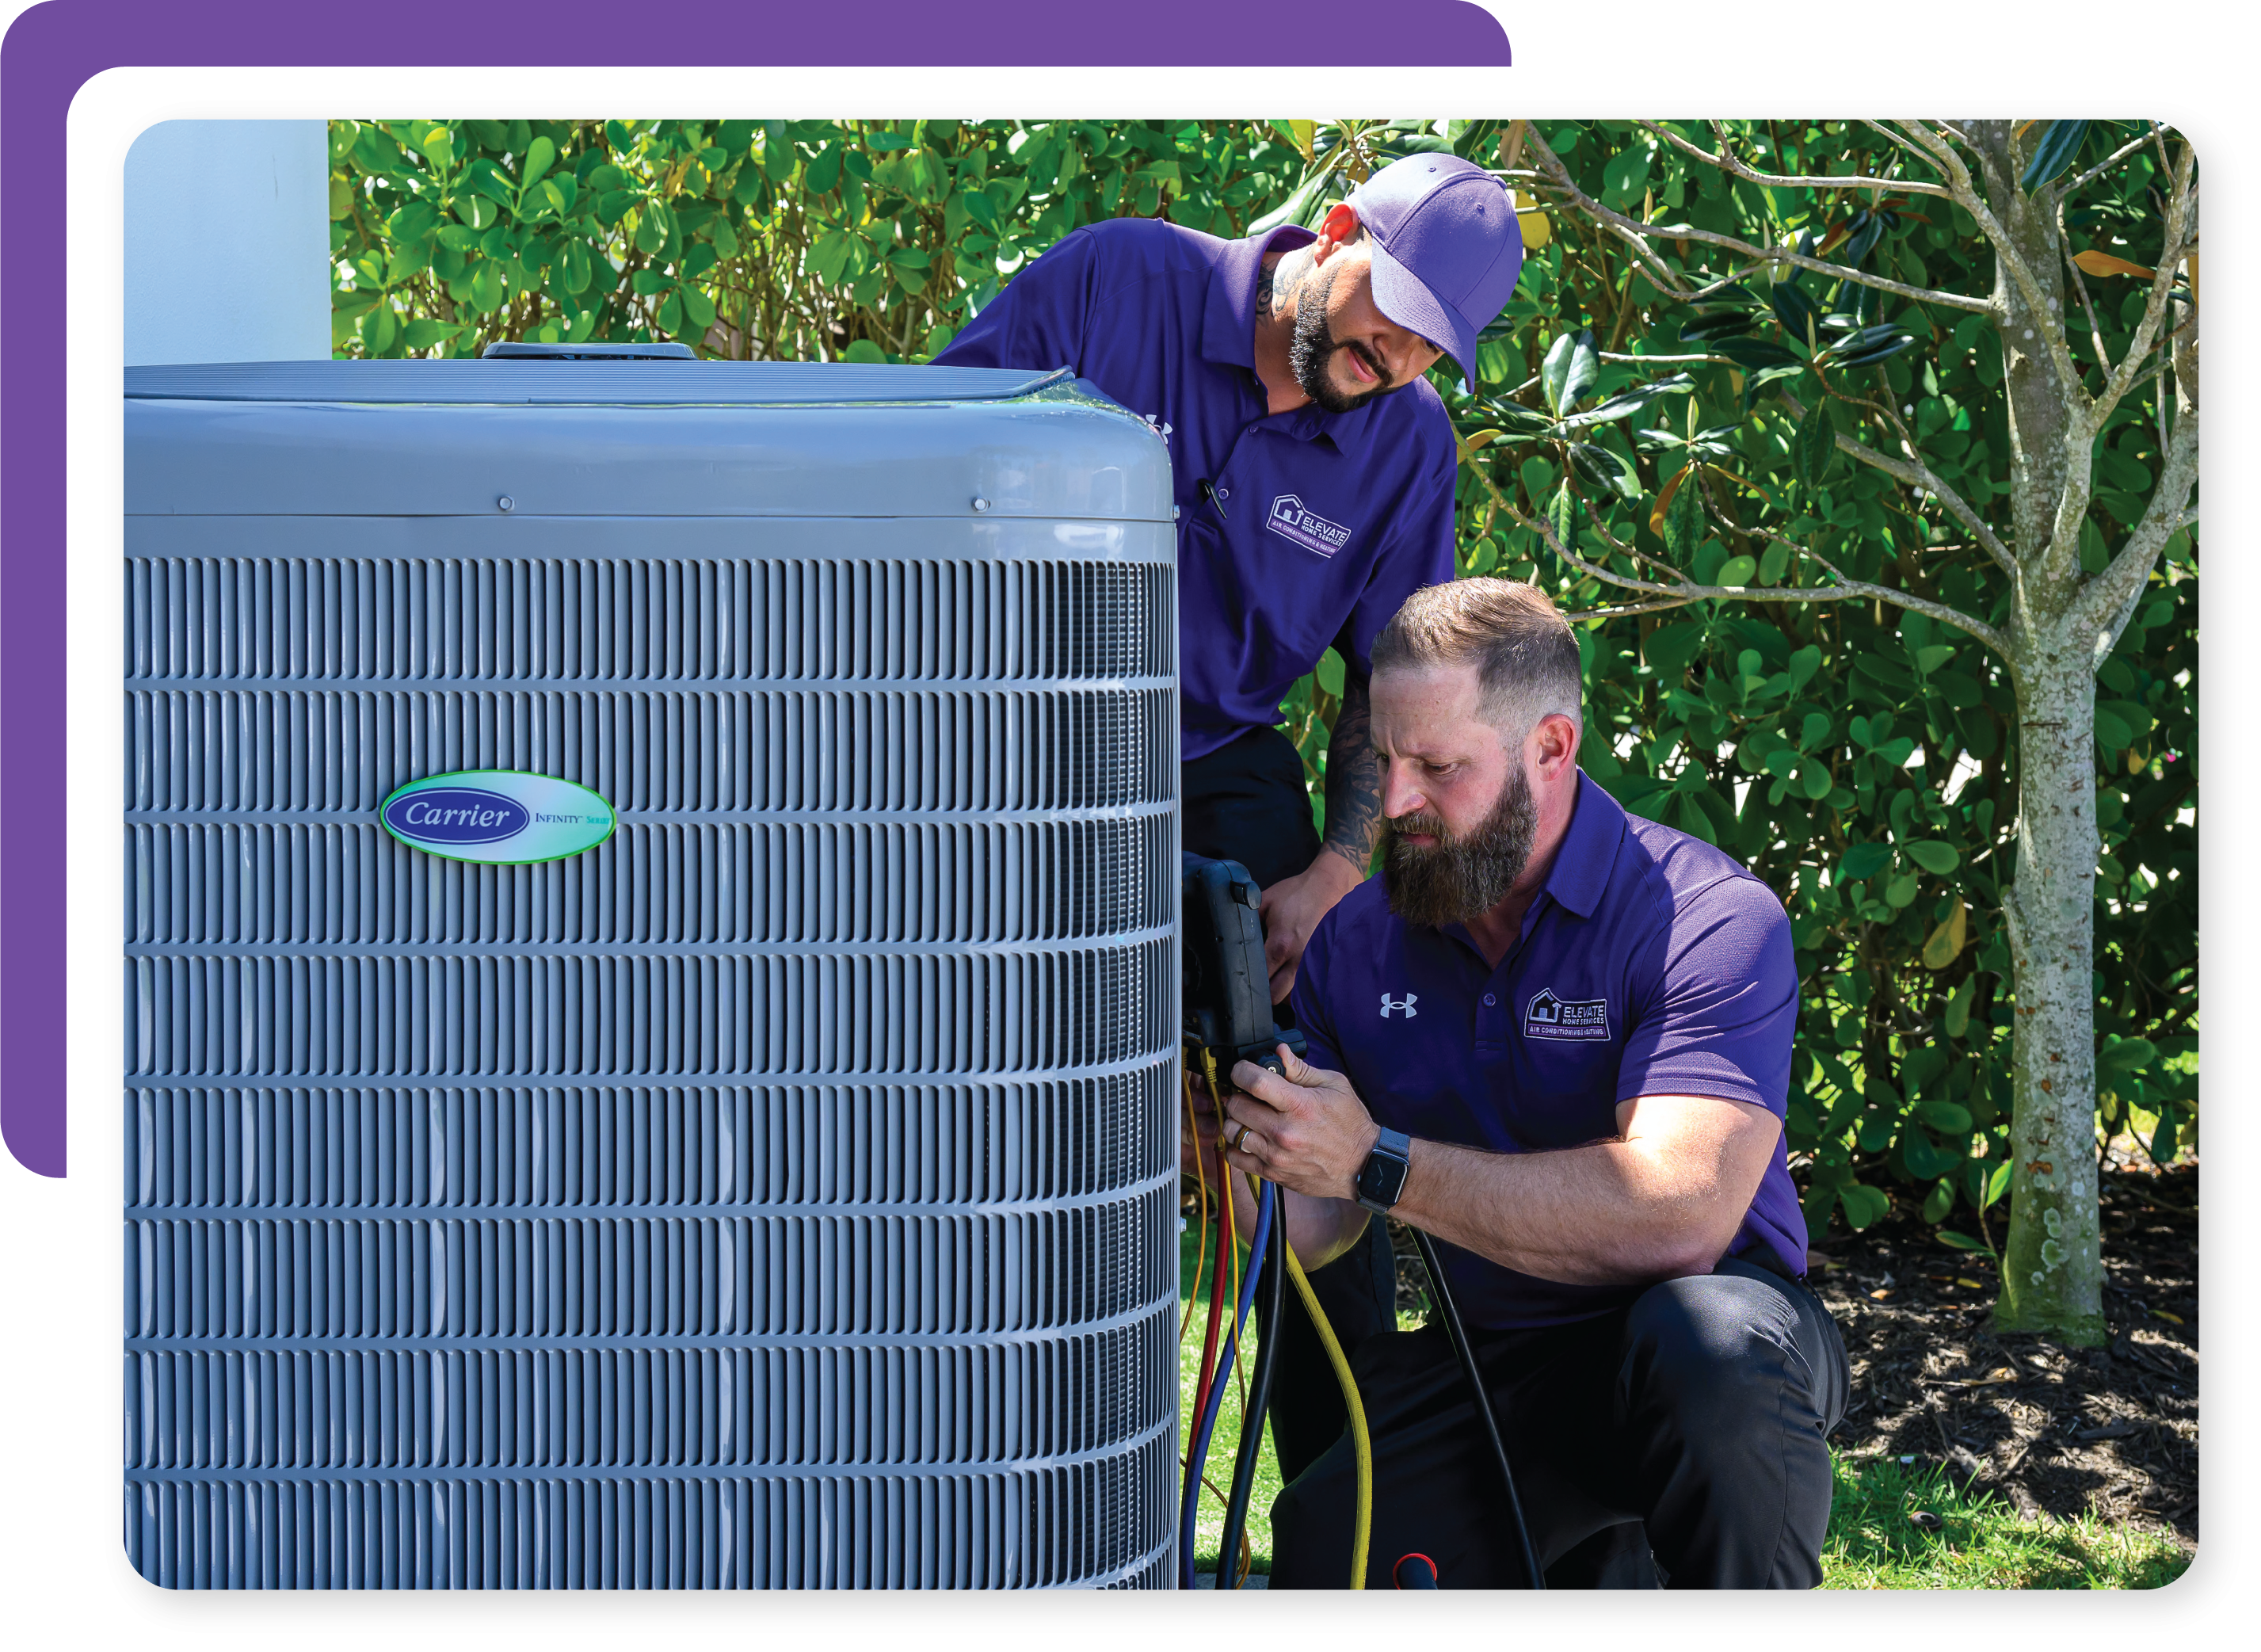 Rounded edge image of two men working on an ac unit